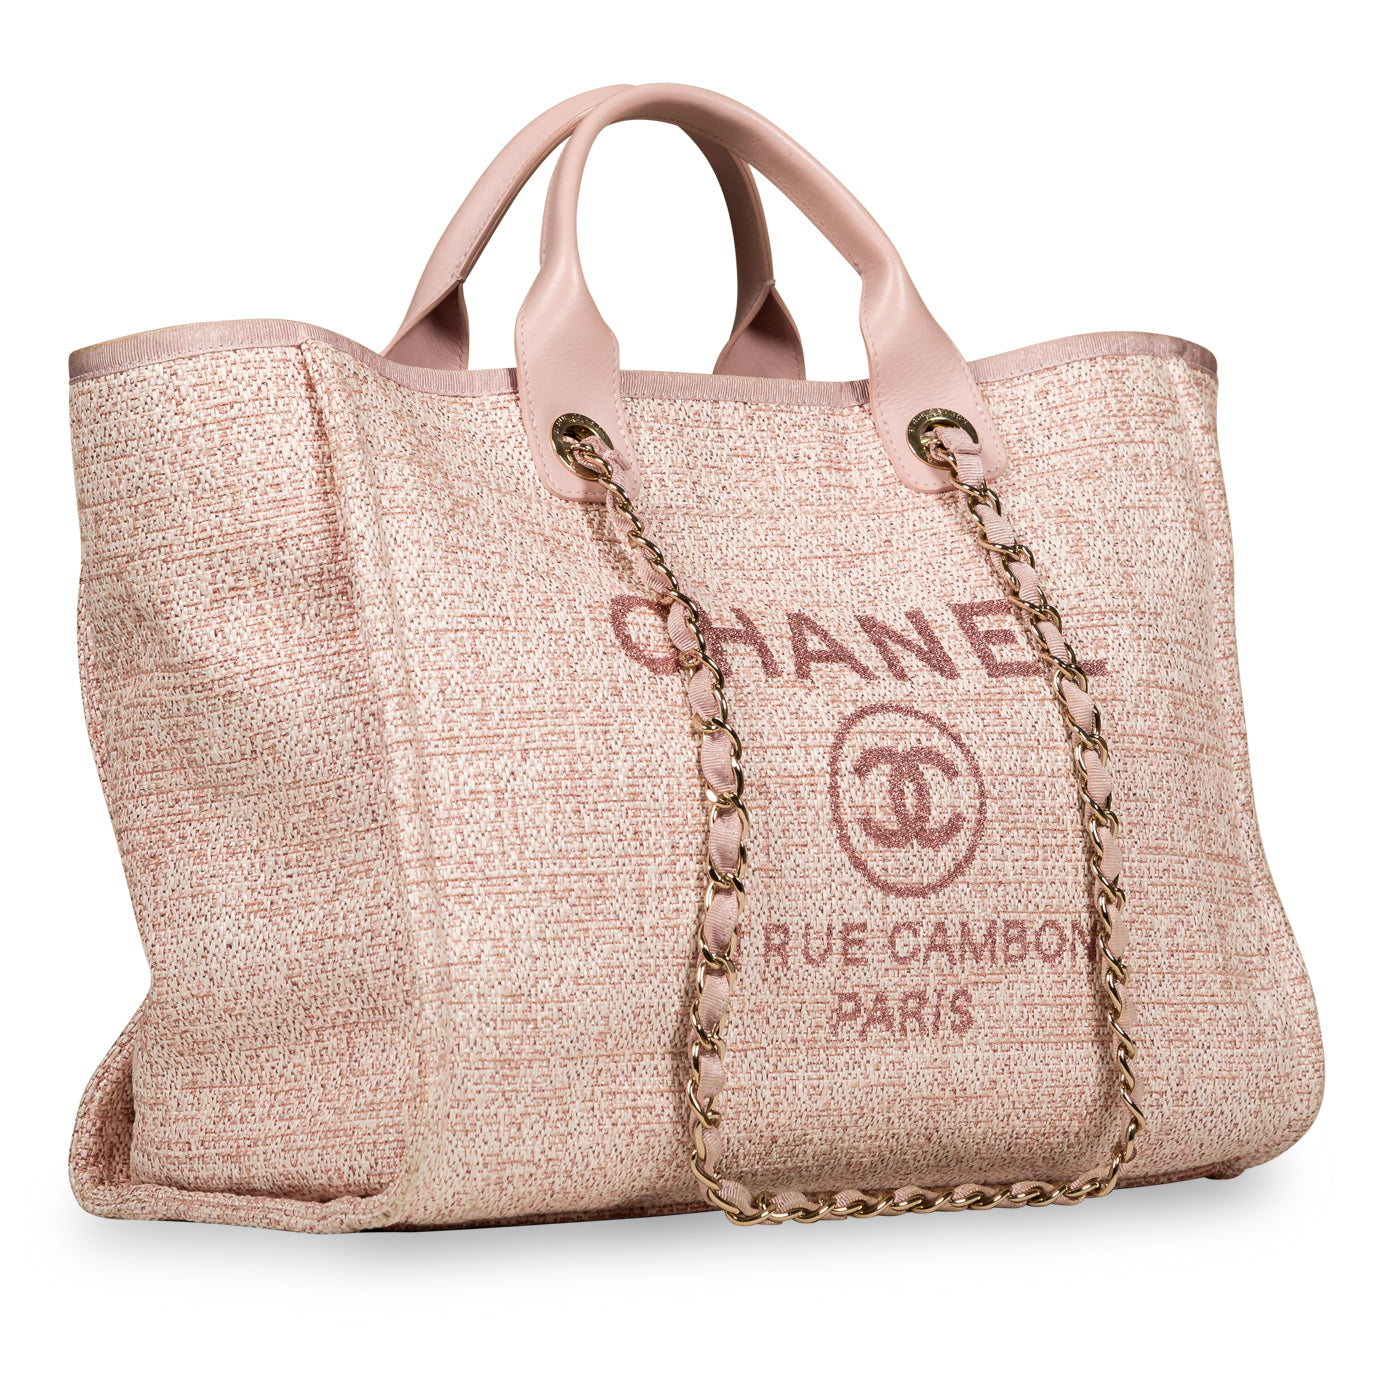 Chanel Deauville Tote Bag, Large, Pink Tweed, Shiny Gold Hardware